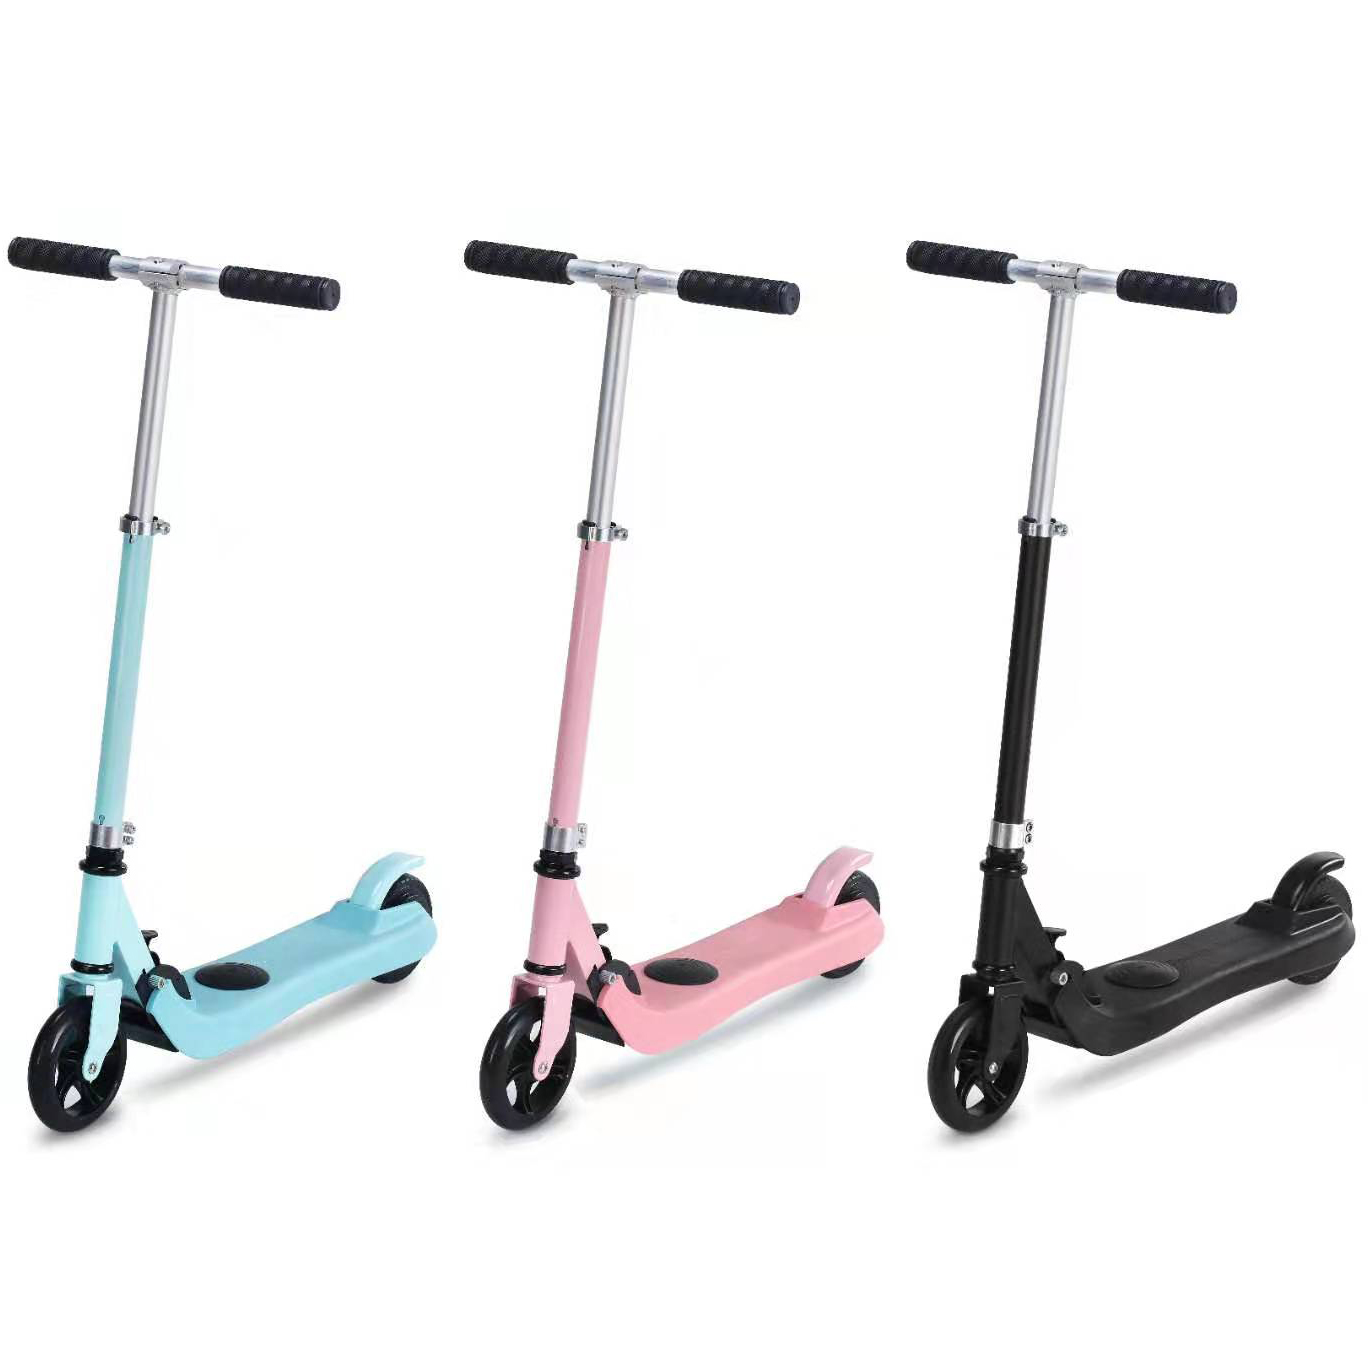 

Rgogo Q3 Children Folding Electric Scooter Adjustable Height Max Speed 4-6km/h Max Load 50kg 1-1.6m Kids Balance Exercise Toys